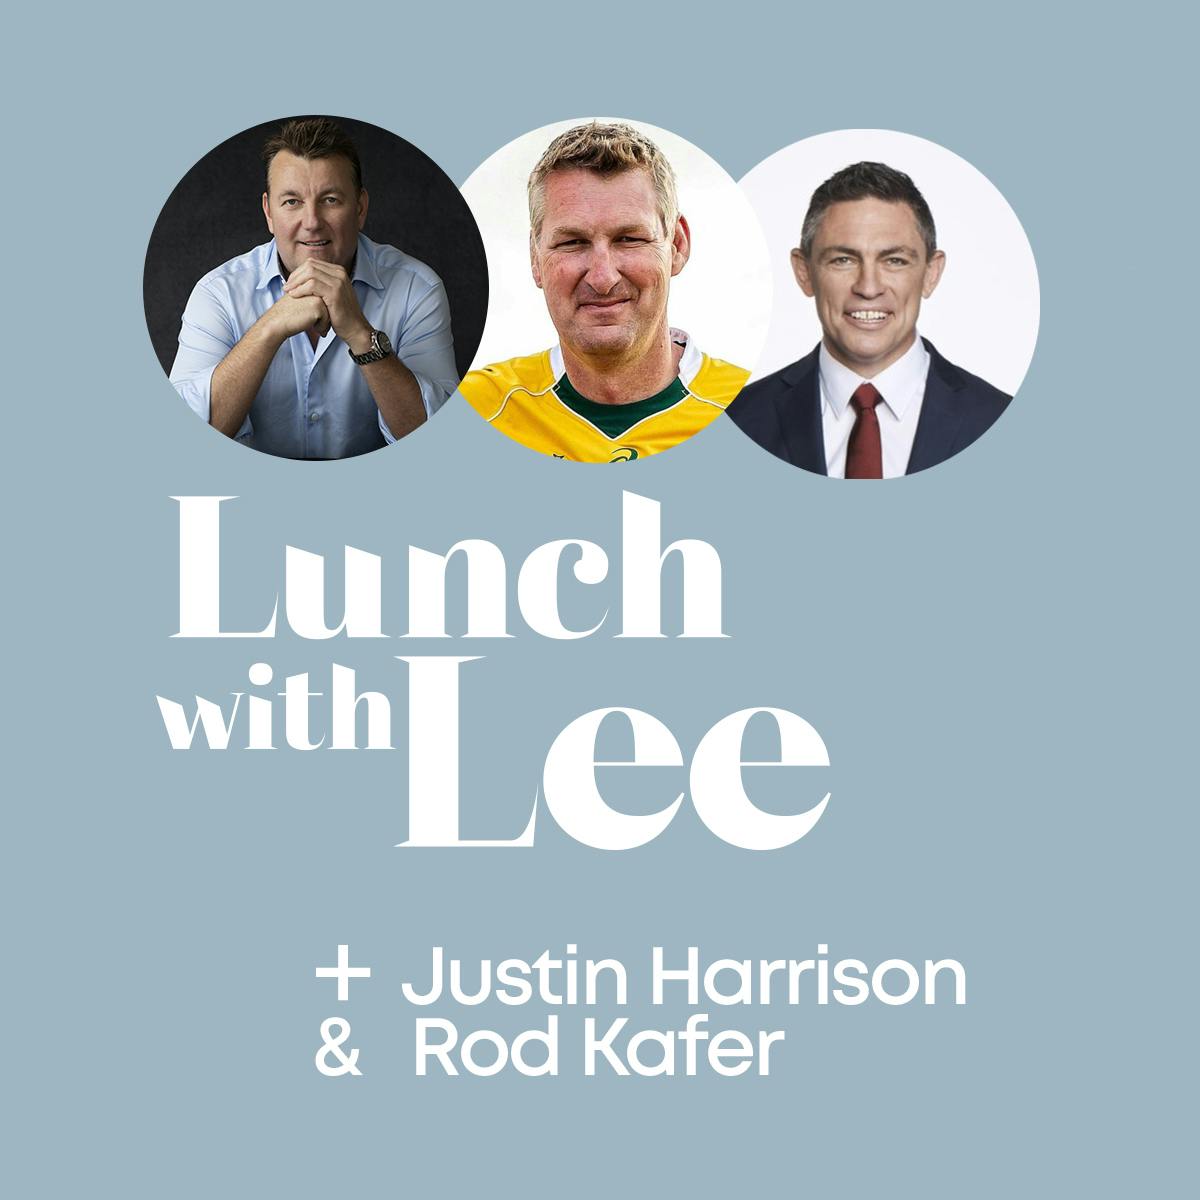 Lunch with Justin Harrison & Rod Kafer